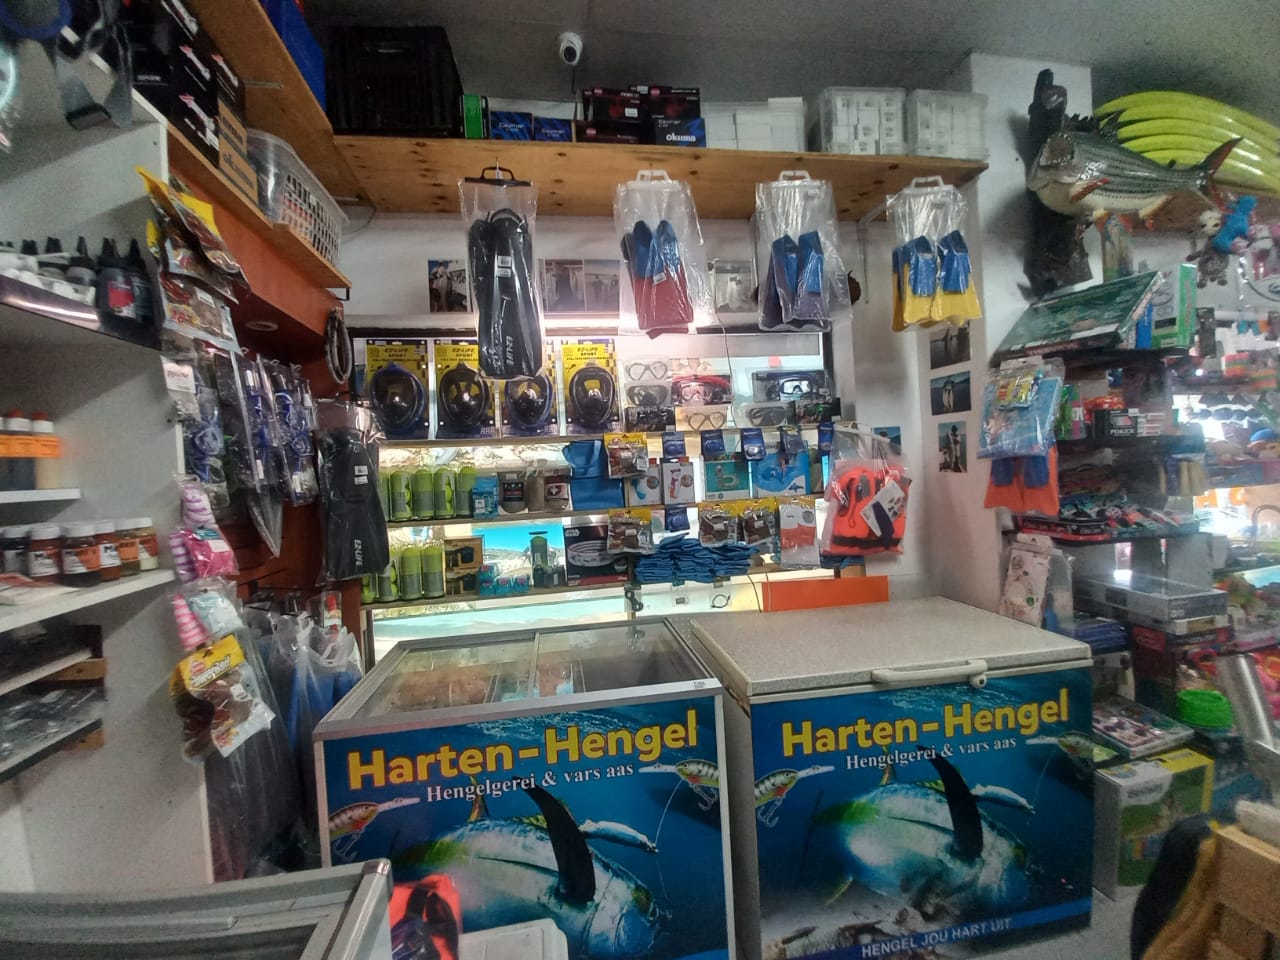 Our fishing store